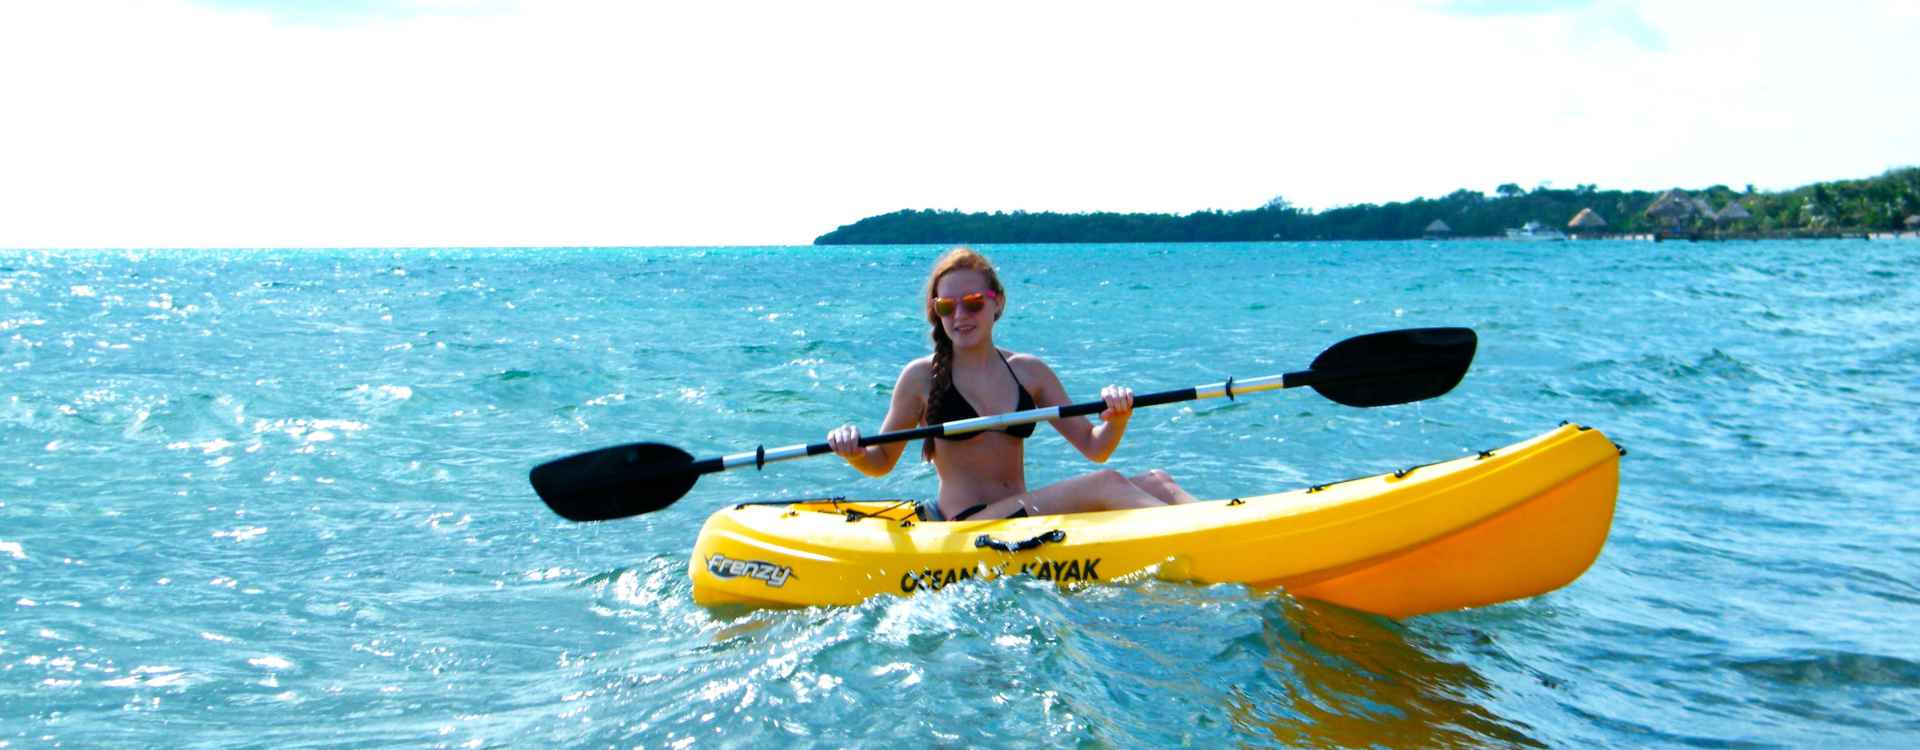 Kayaking Tour in Ixtapa Zihuatanejo Mexico | Pacific Tours Ixtapa. Kayaking in Barra de Potosi (20 minutes of Ixtapa Zihuatanejo) is very nice due to its calm water and variety of birds that can can be seen at the morning. Enjoy this Sunrise Kayak Tour in Ixtapa Zihuatanejo